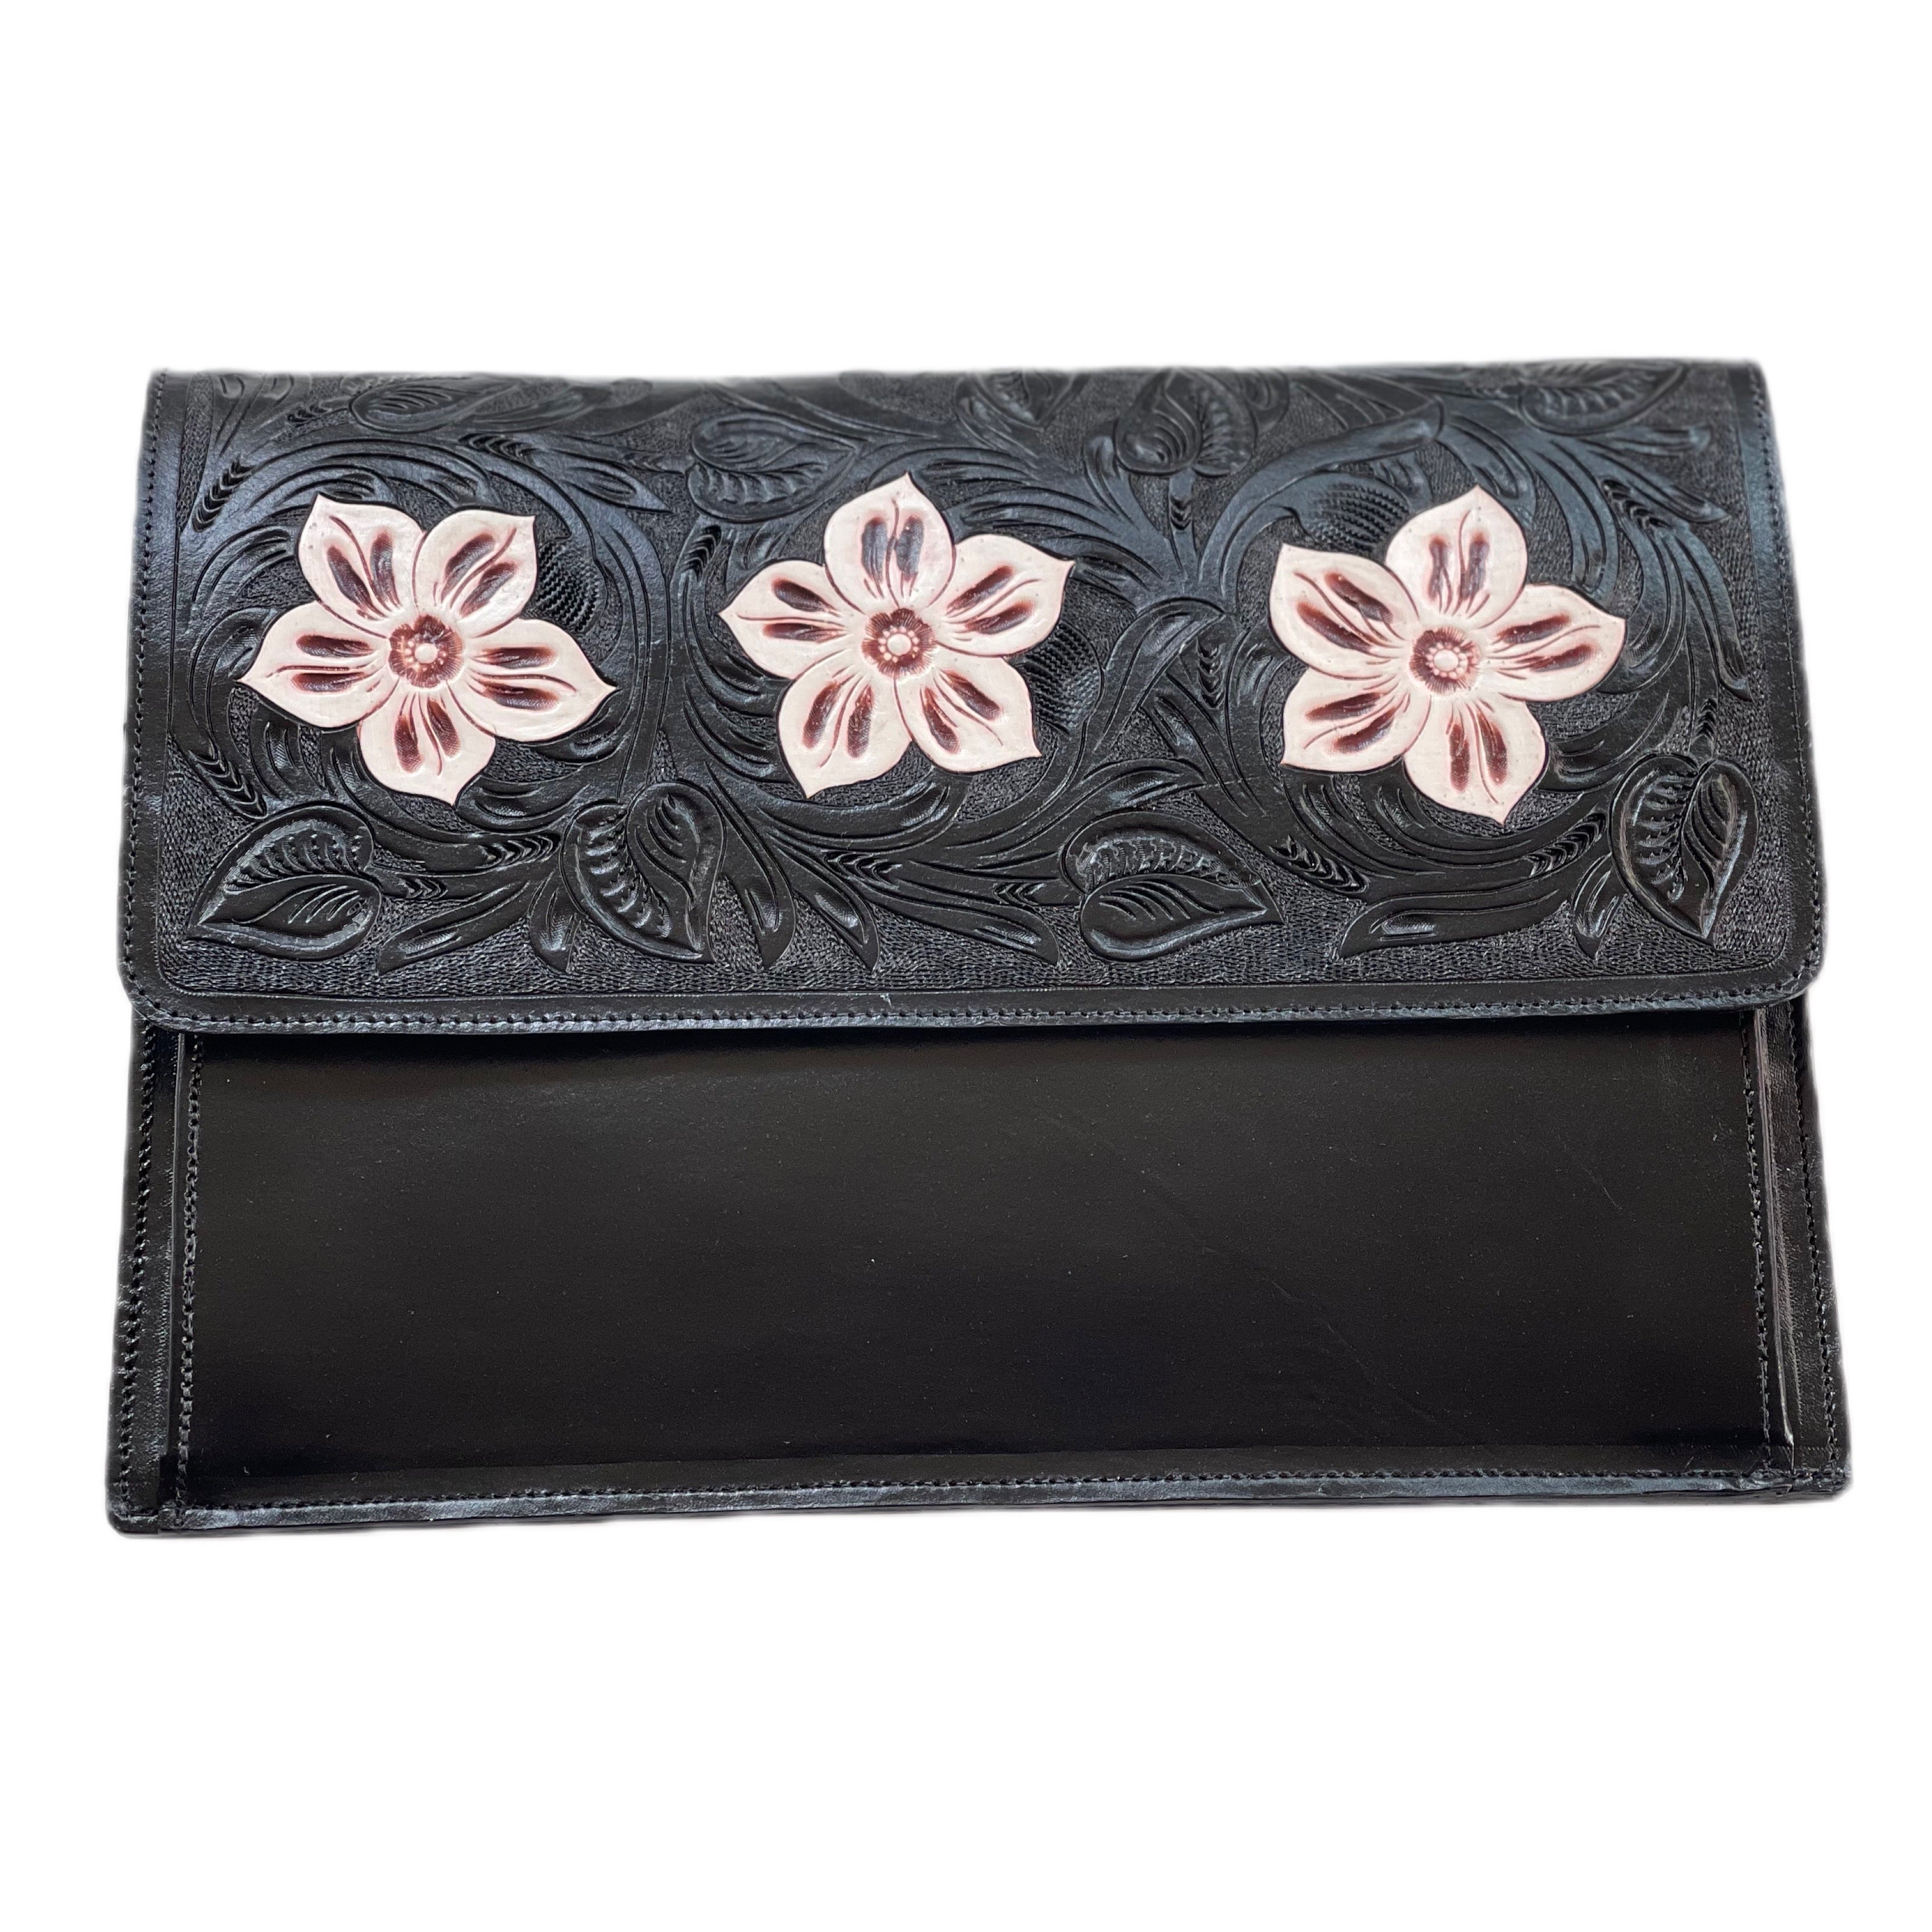 FLORES LAPTOP SLEEVE - BLACK AND WHITE